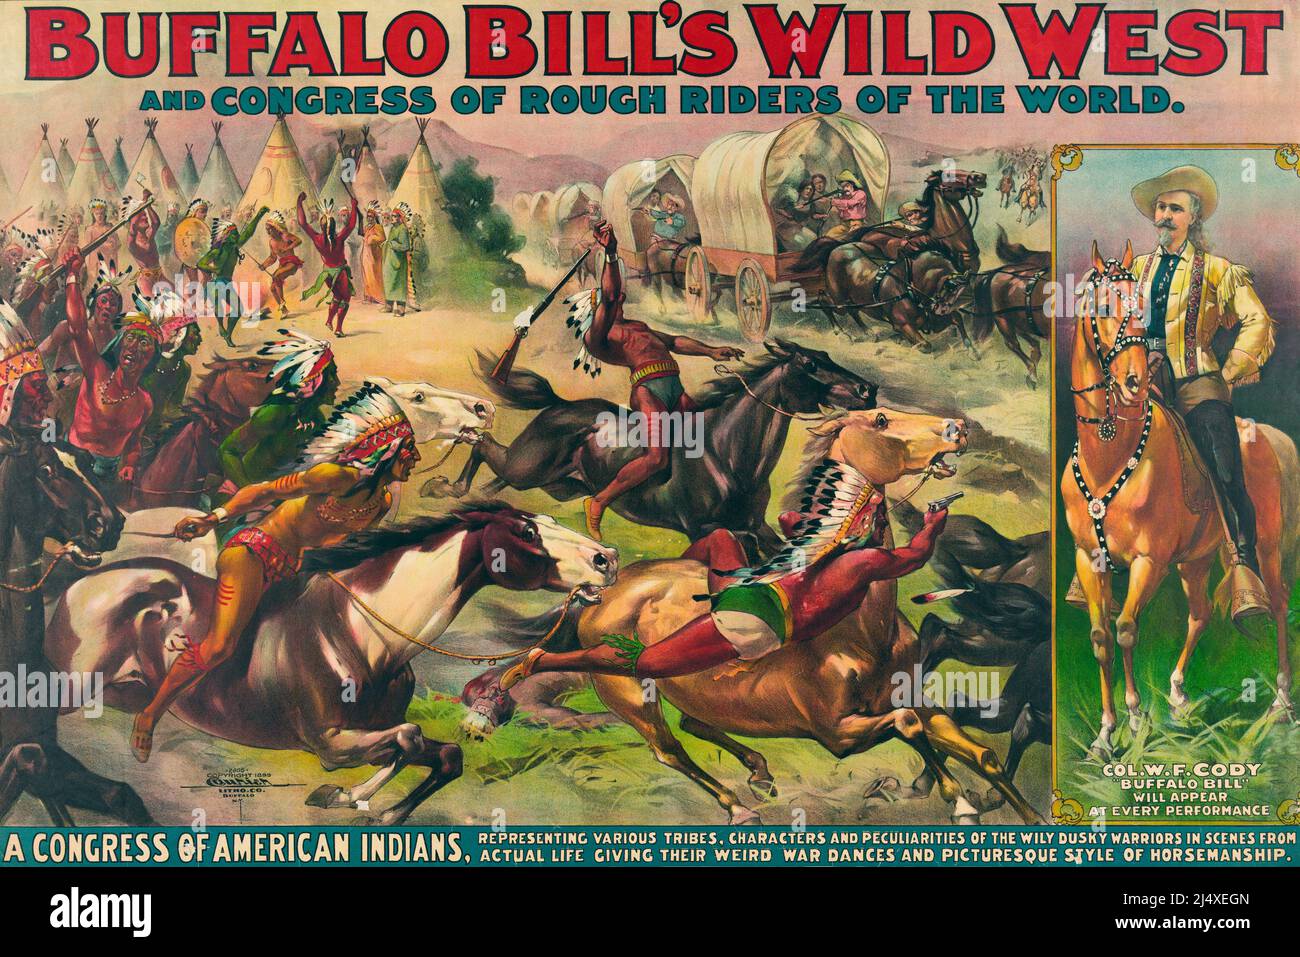 Poster for Buffalo Bill's Wild West circus performance.  Published 1899.  William Frederick 'Buffalo Bill' Cody, 1846 - 1917.  American soldier, hunter, freemason and showman.  The main picture shows a battle between Indians and settlers in covered wagons.  A seperate equestrian picture of Cody to the right. Stock Photo